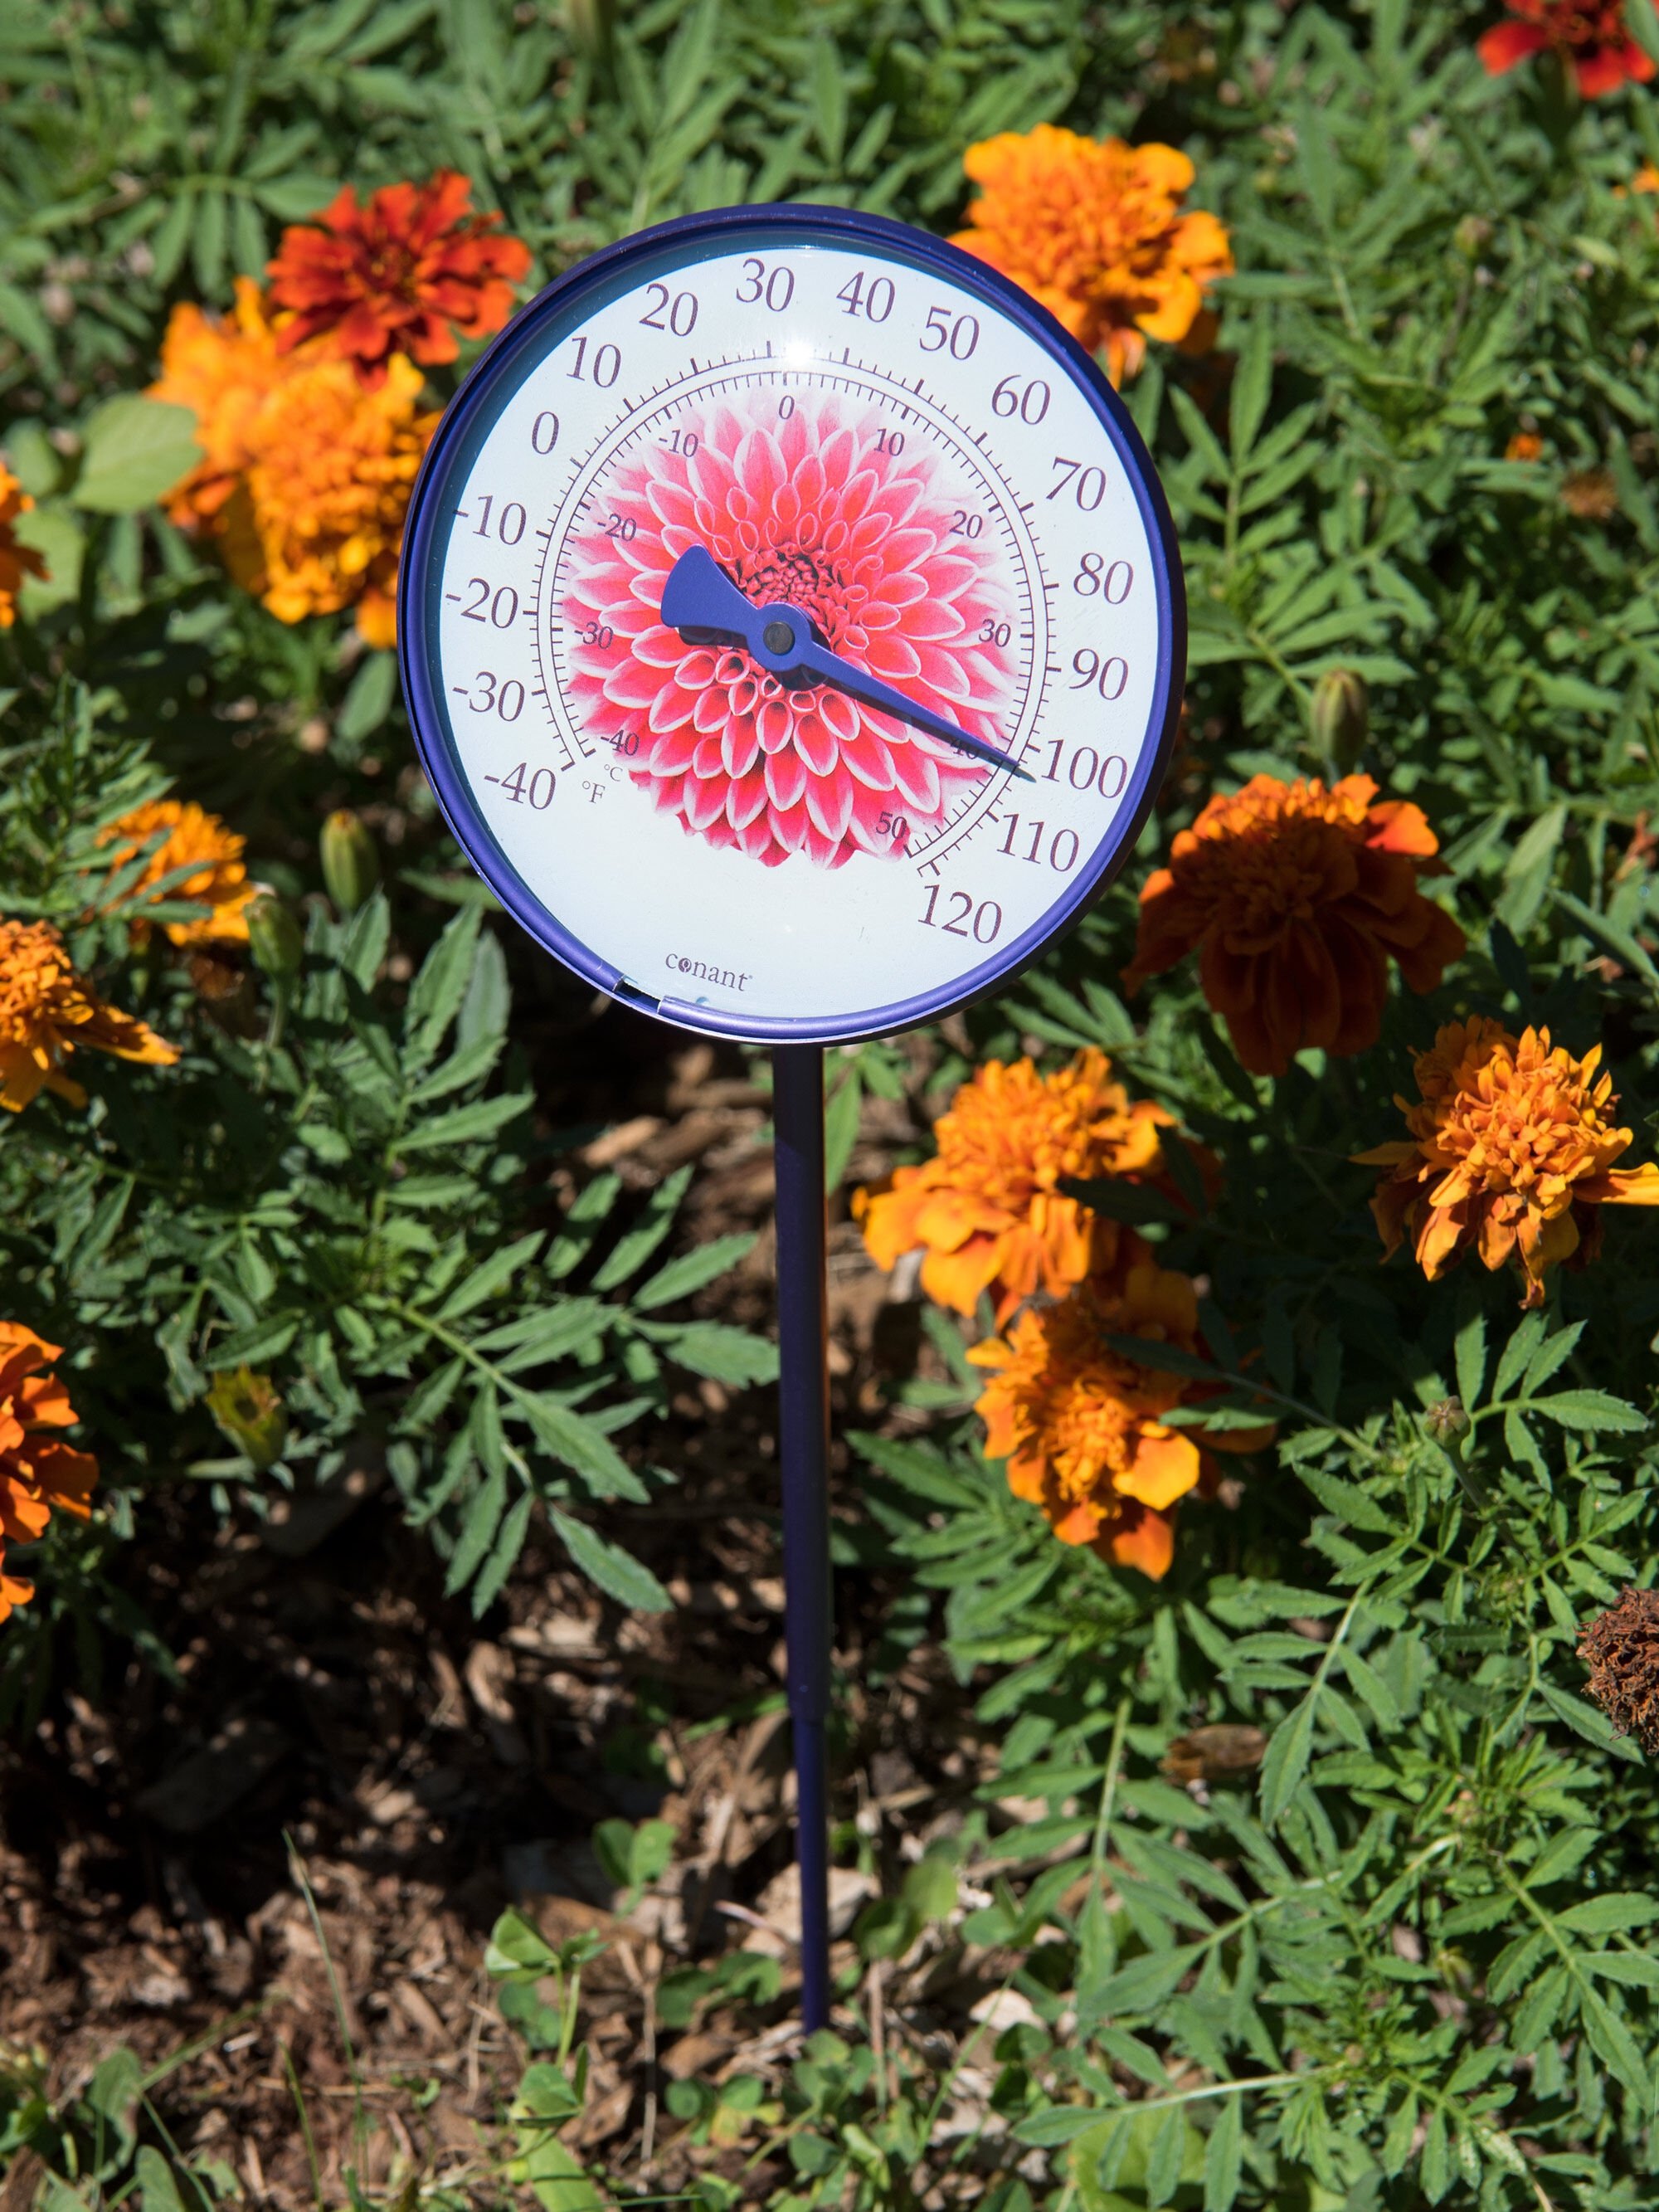 Weems and Plath Decorative Indoor Outdoor Thermometer